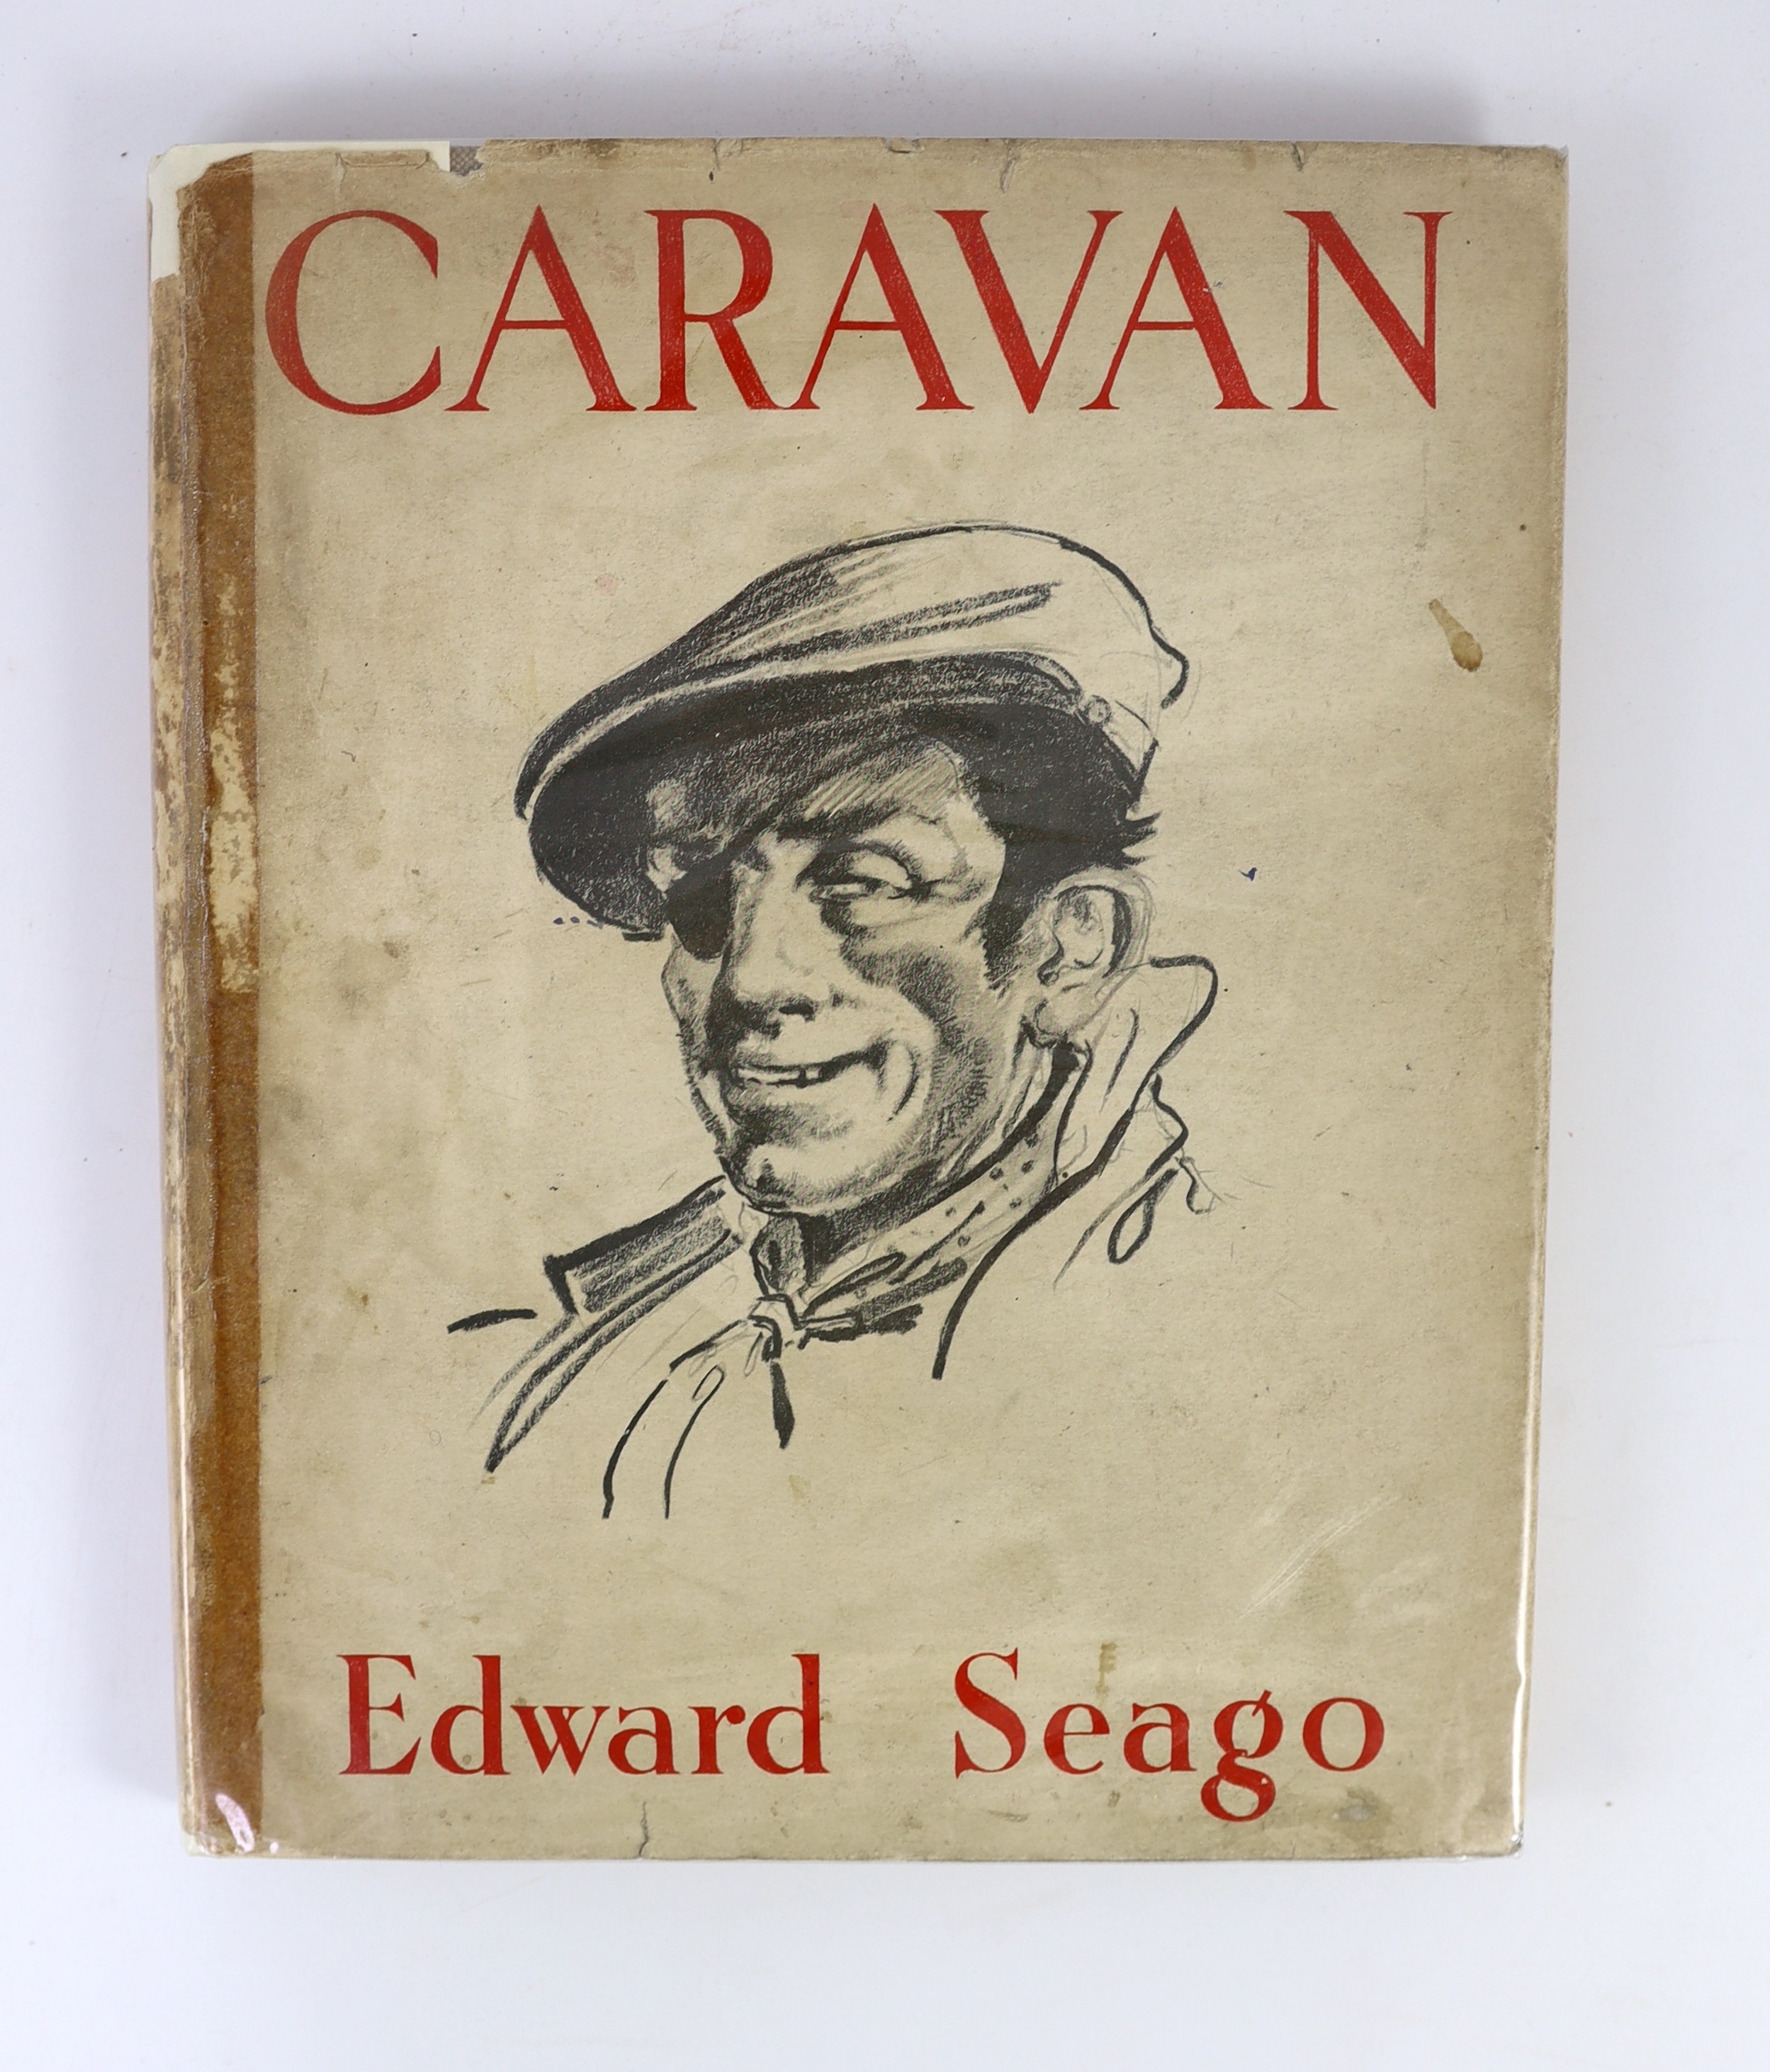 Seago, Edward - 7 works, about or by:- Caravan, Collins, London, 1937; Hawcroft, Francis W. - Edward Seago: A Review of the Years 1953-1964, Collins, London, 1965; Reid, James W. - Edward Seago: The Landscape Art, 1991;